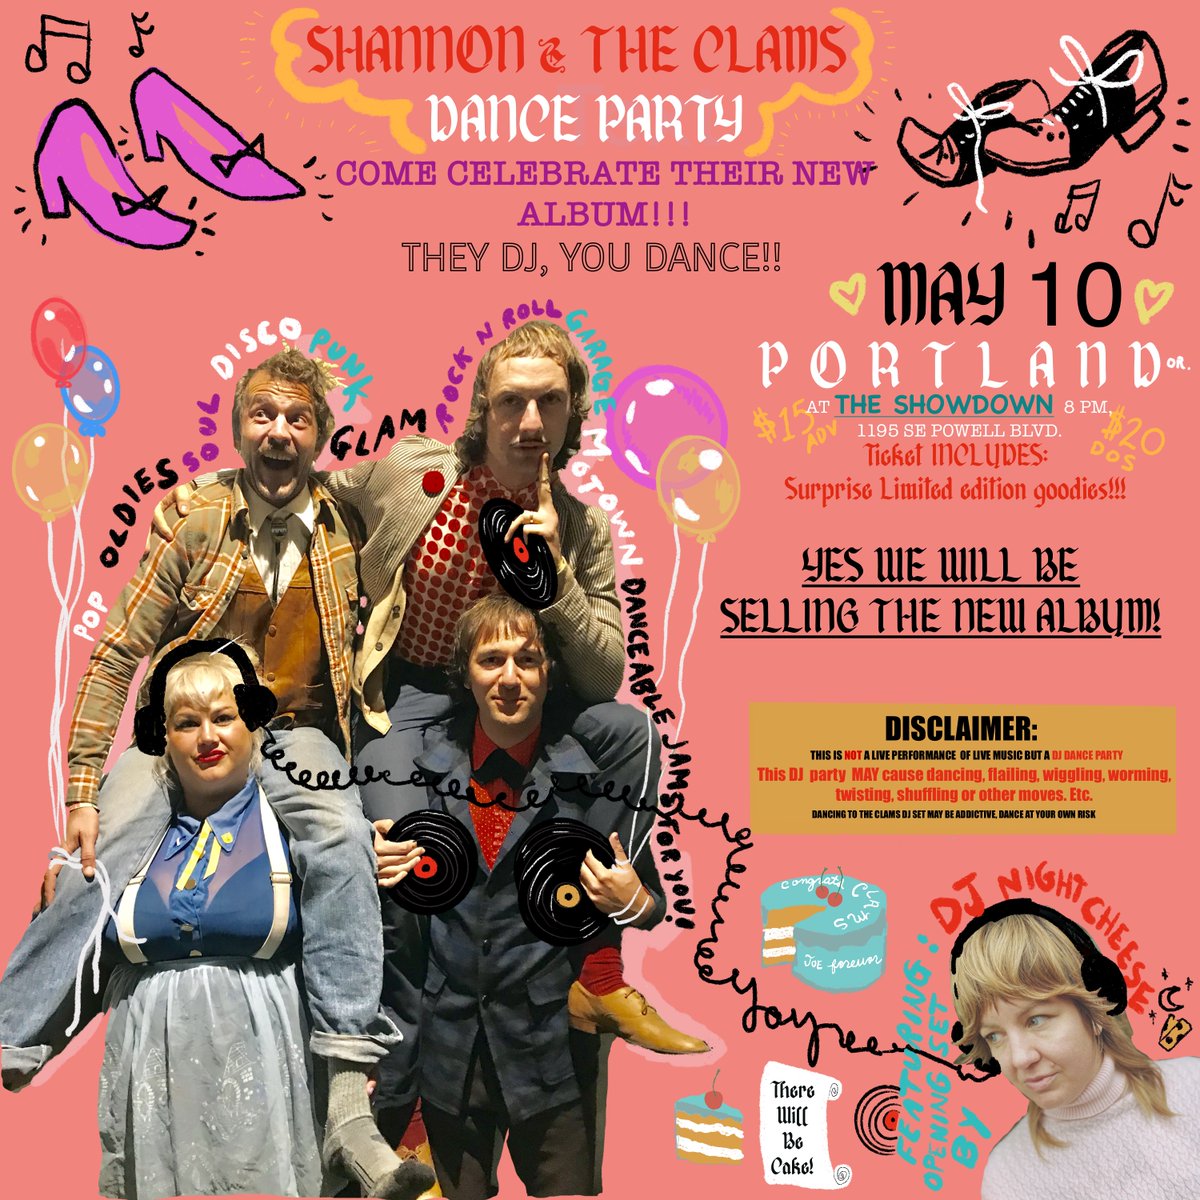 Wanna celebrate the grand release of The Moon Is In The Wrong Place with us?! Great! PUT ON THOSE DANCING SHOES cuz the Clams are throwing a DANCE PARTY for you all in Portland at The Showdown! We will be DJing, we will have RECORDS! Come hang!!